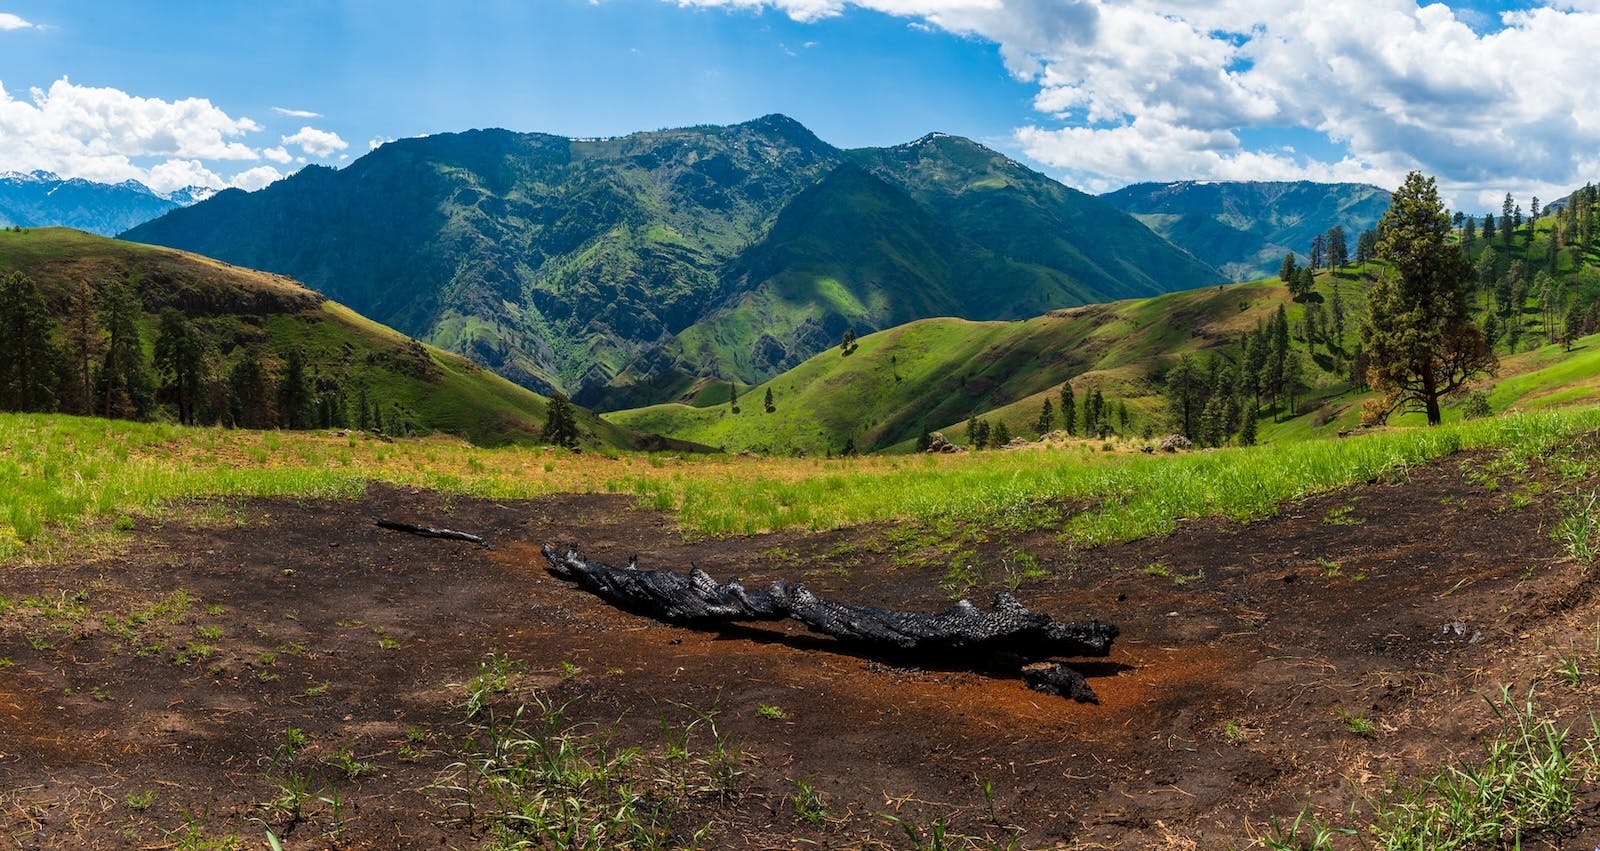 A burnt log and Bear Mountain along the Bench Trail in Hells Canyon Oregon